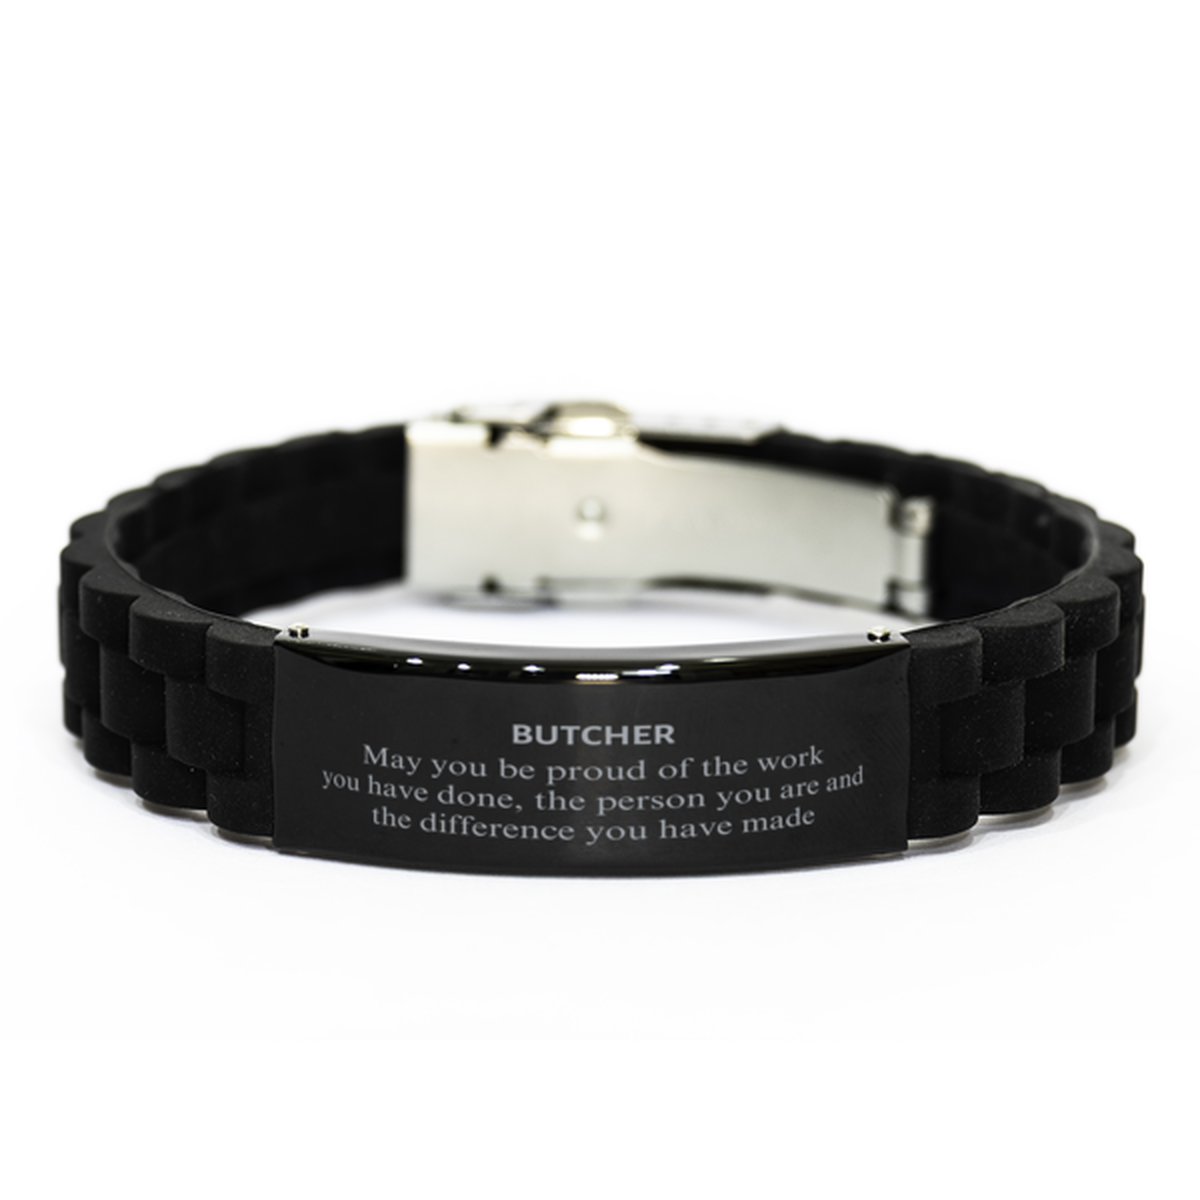 Butcher May you be proud of the work you have done, Retirement Butcher Black Glidelock Clasp Bracelet for Colleague Appreciation Gifts Amazing for Butcher